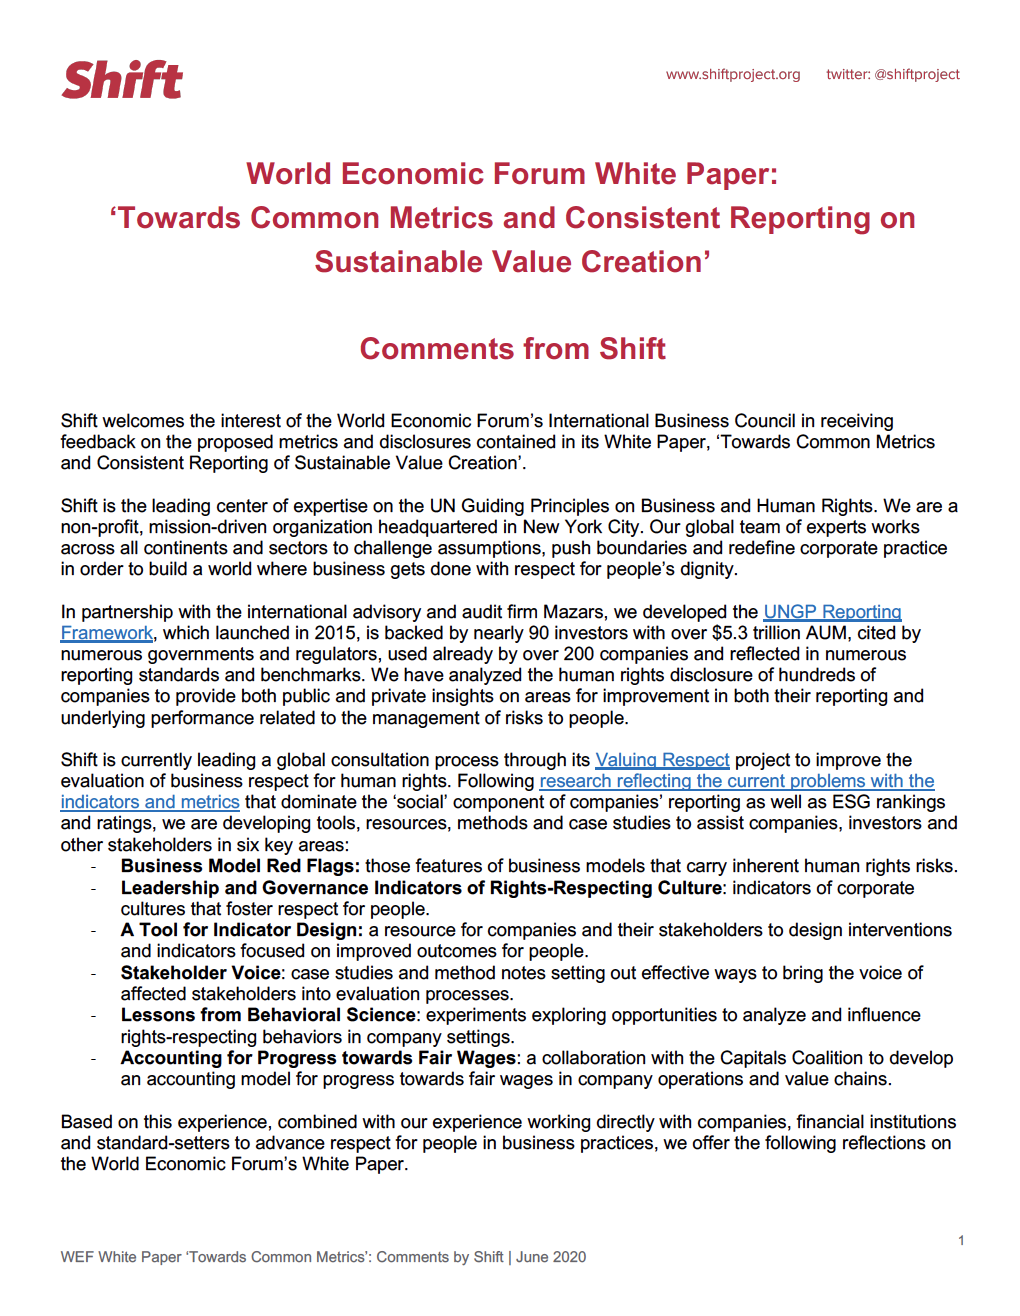 Reflections offered by Shift on the World Economic Forum’s White Paper